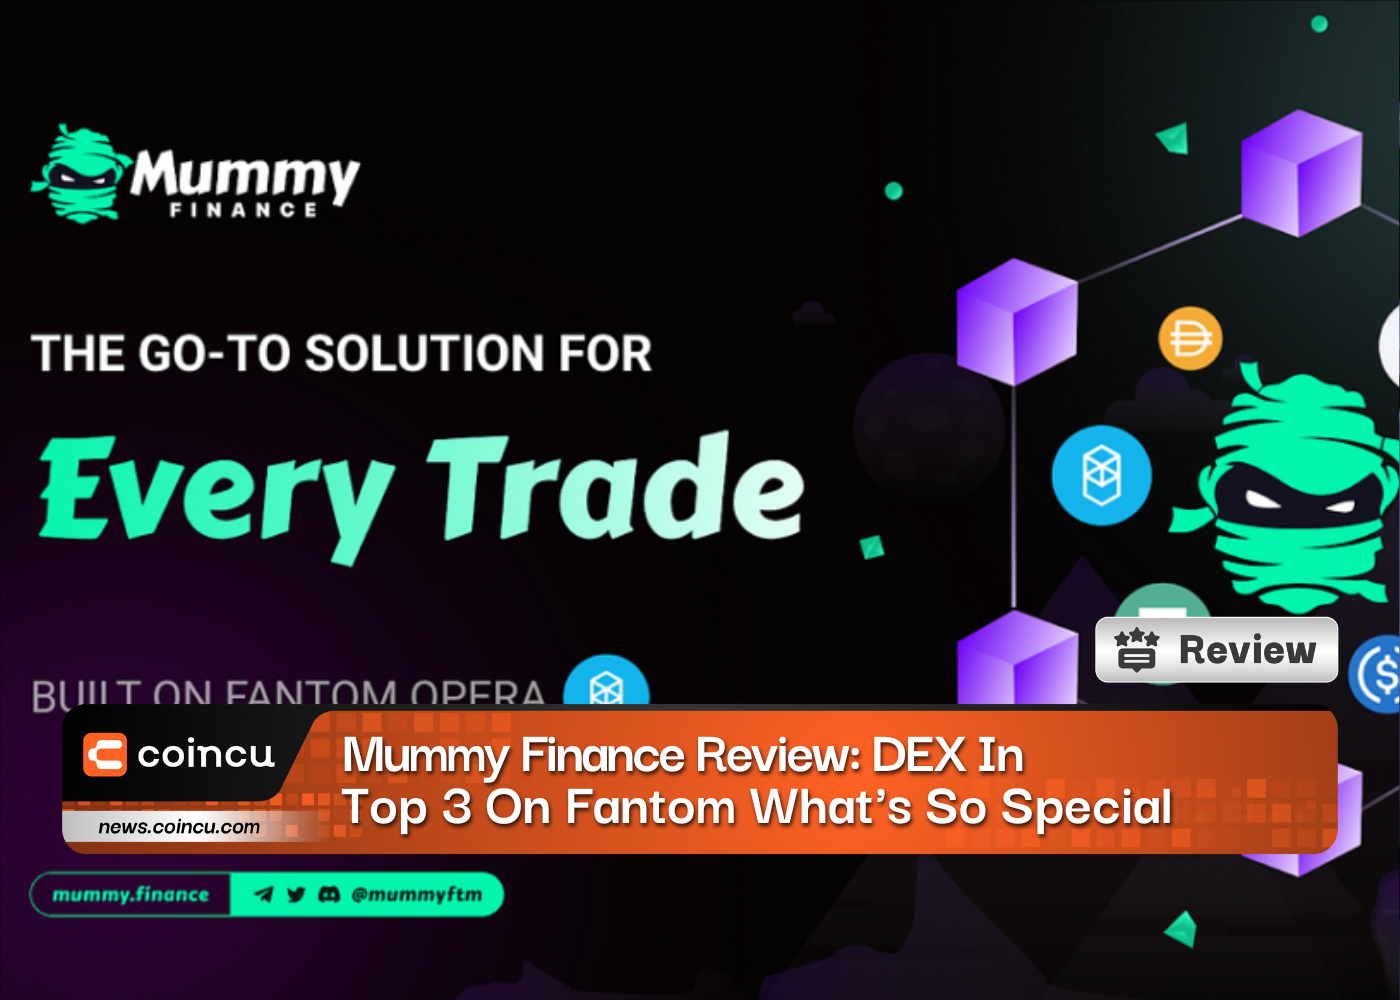 Mummy Finance Review: DEX In Top 3 On Fantom What’s So Special